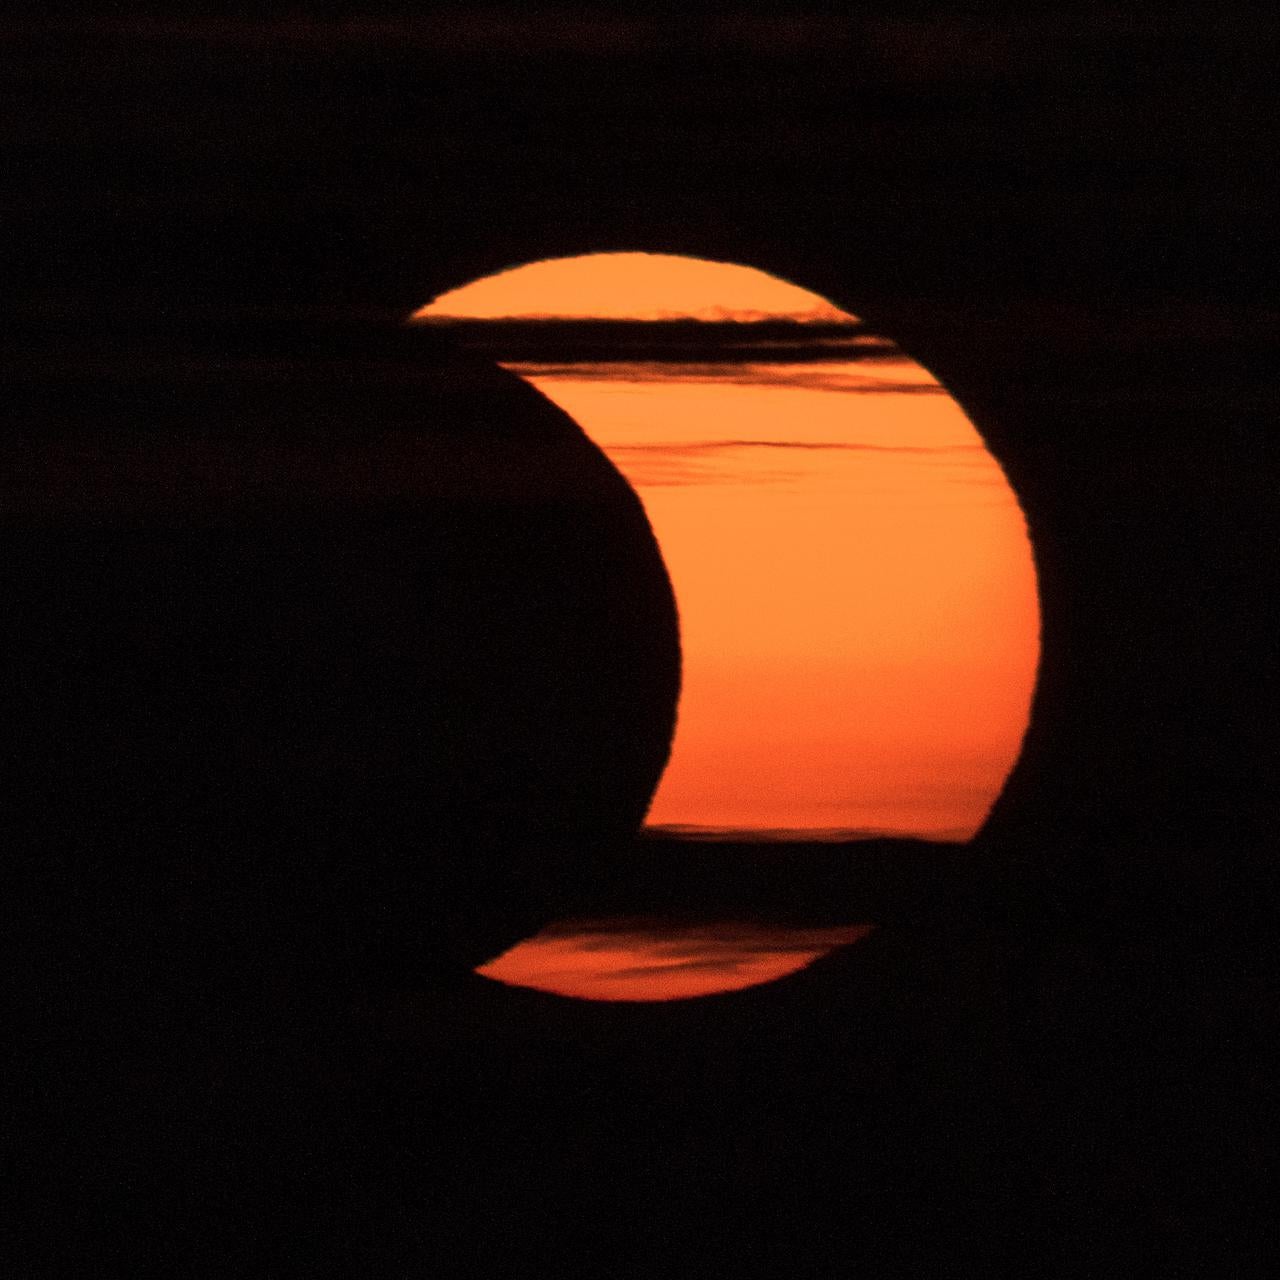 Annular solar eclipse visible in Oxford this Saturday - The Oxford ...